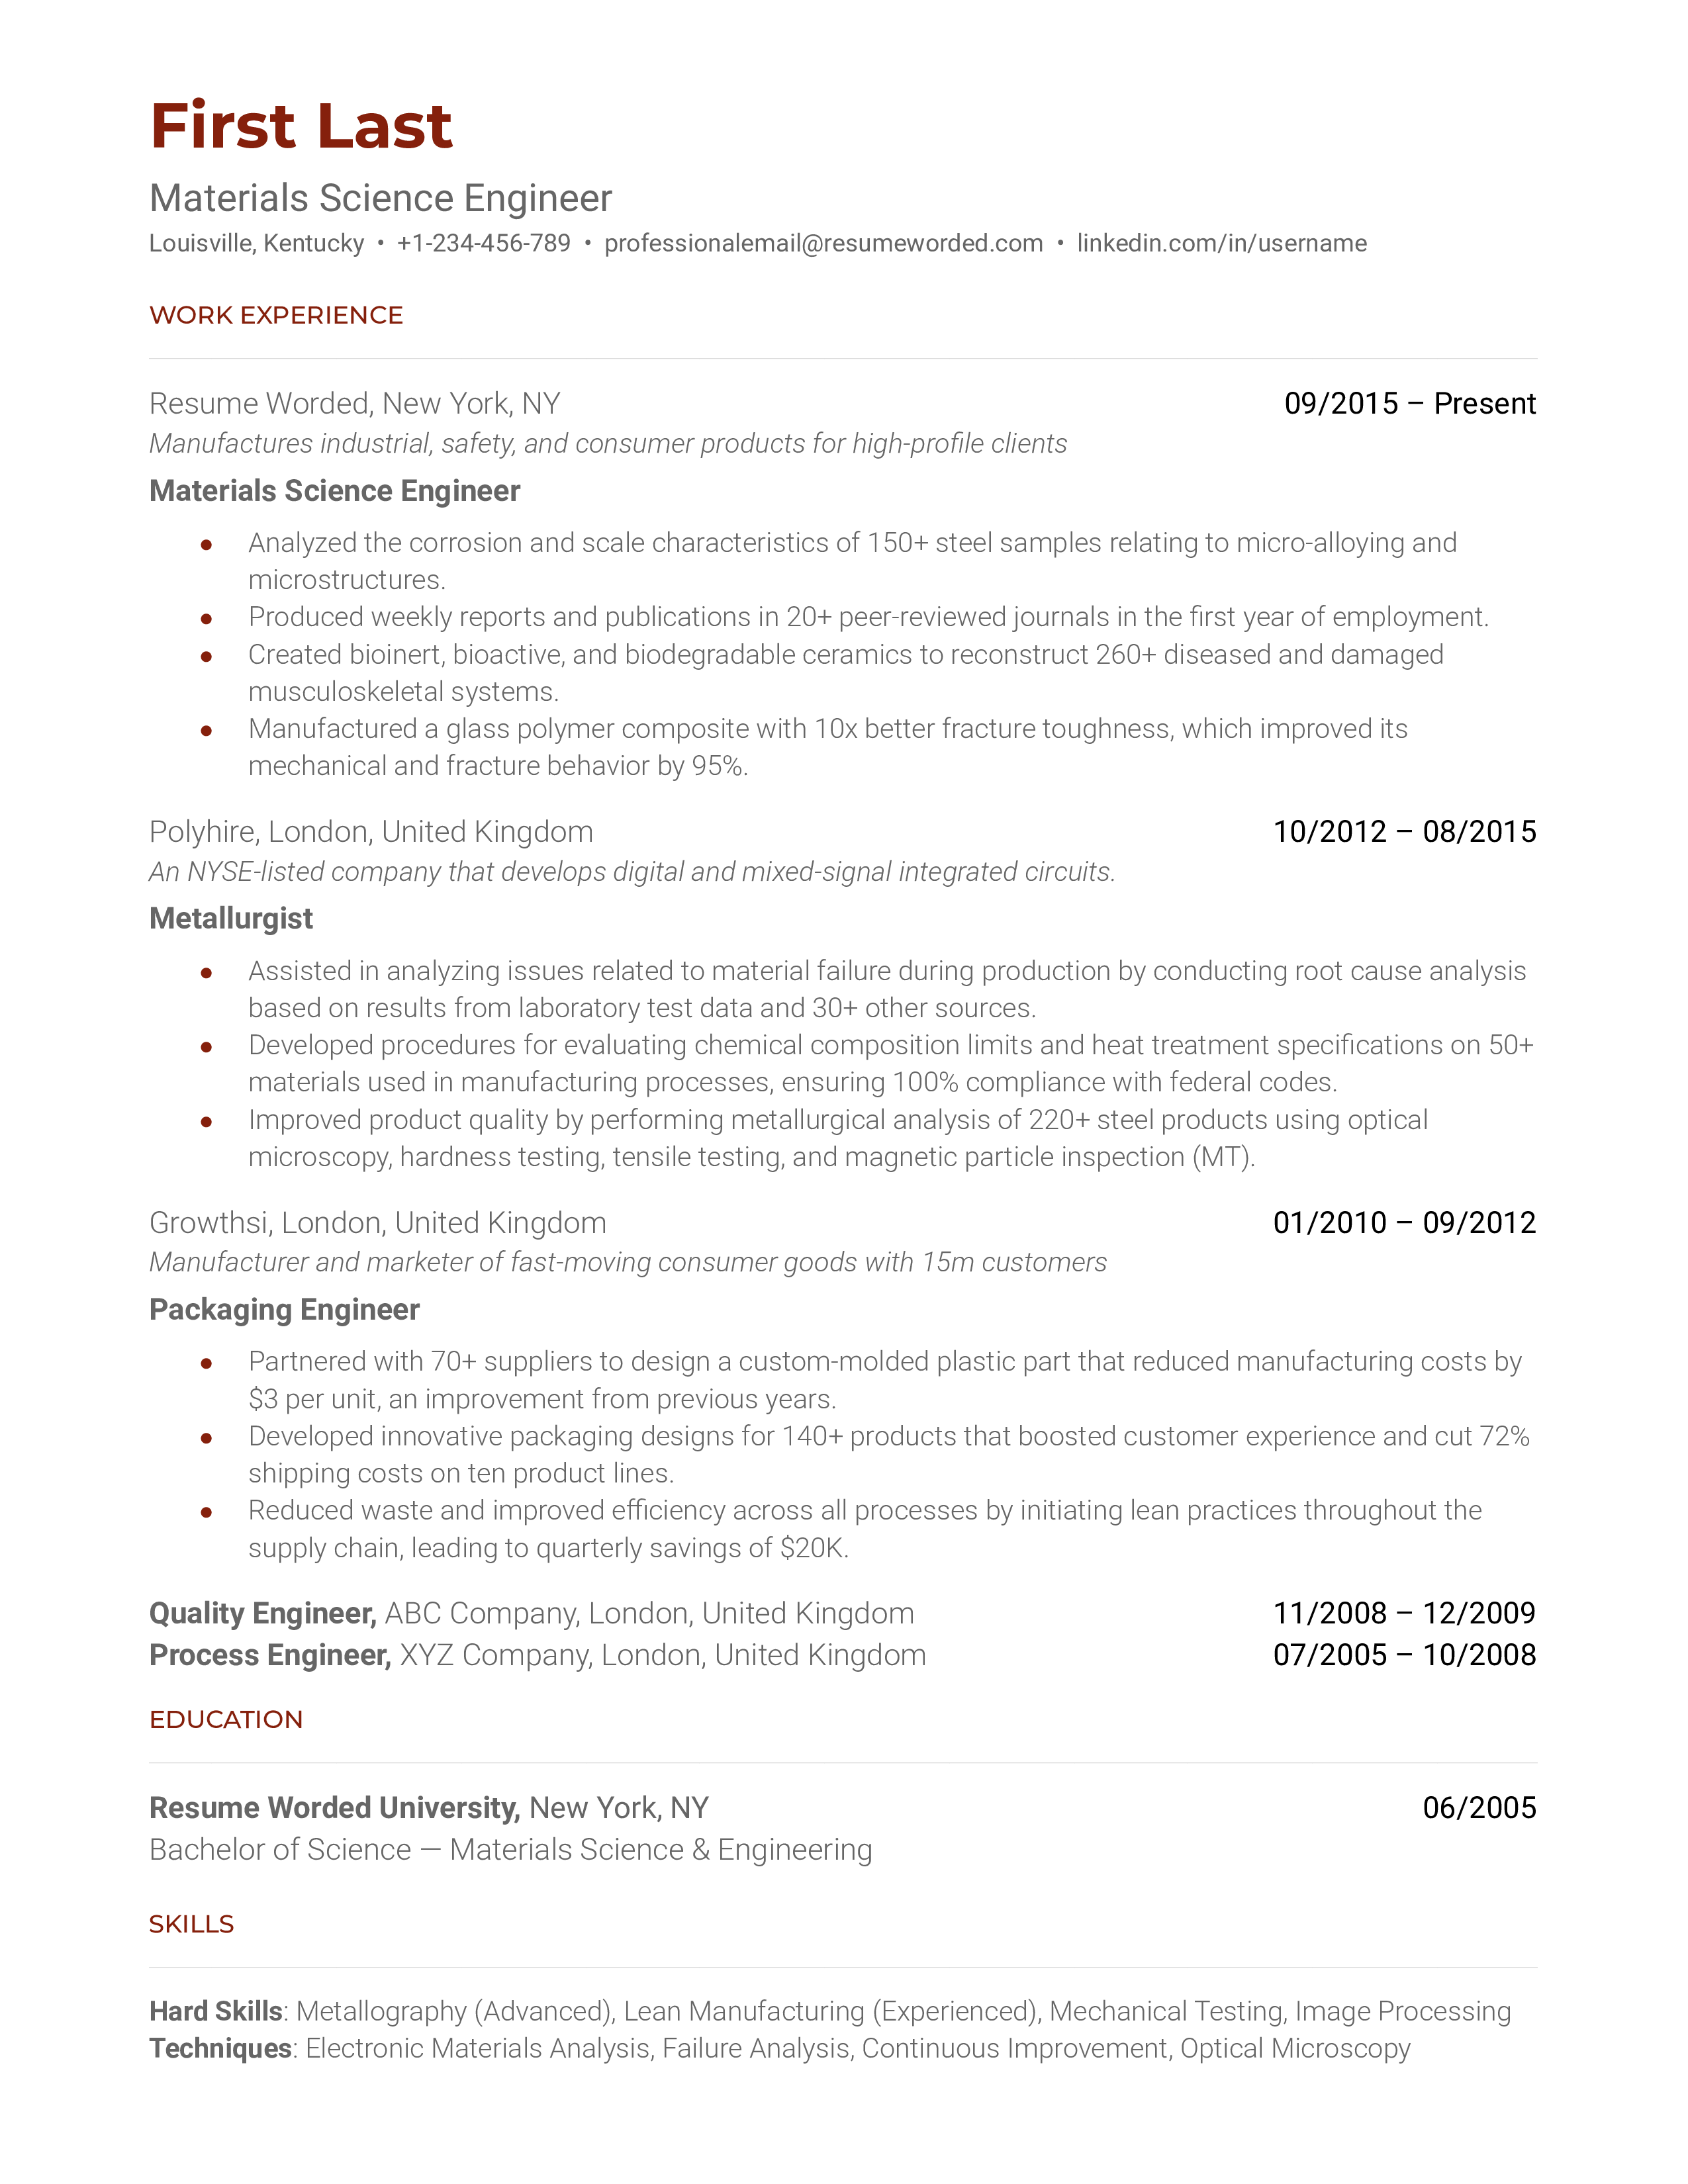 A materials science engineer resume template organizing experience chronologically.